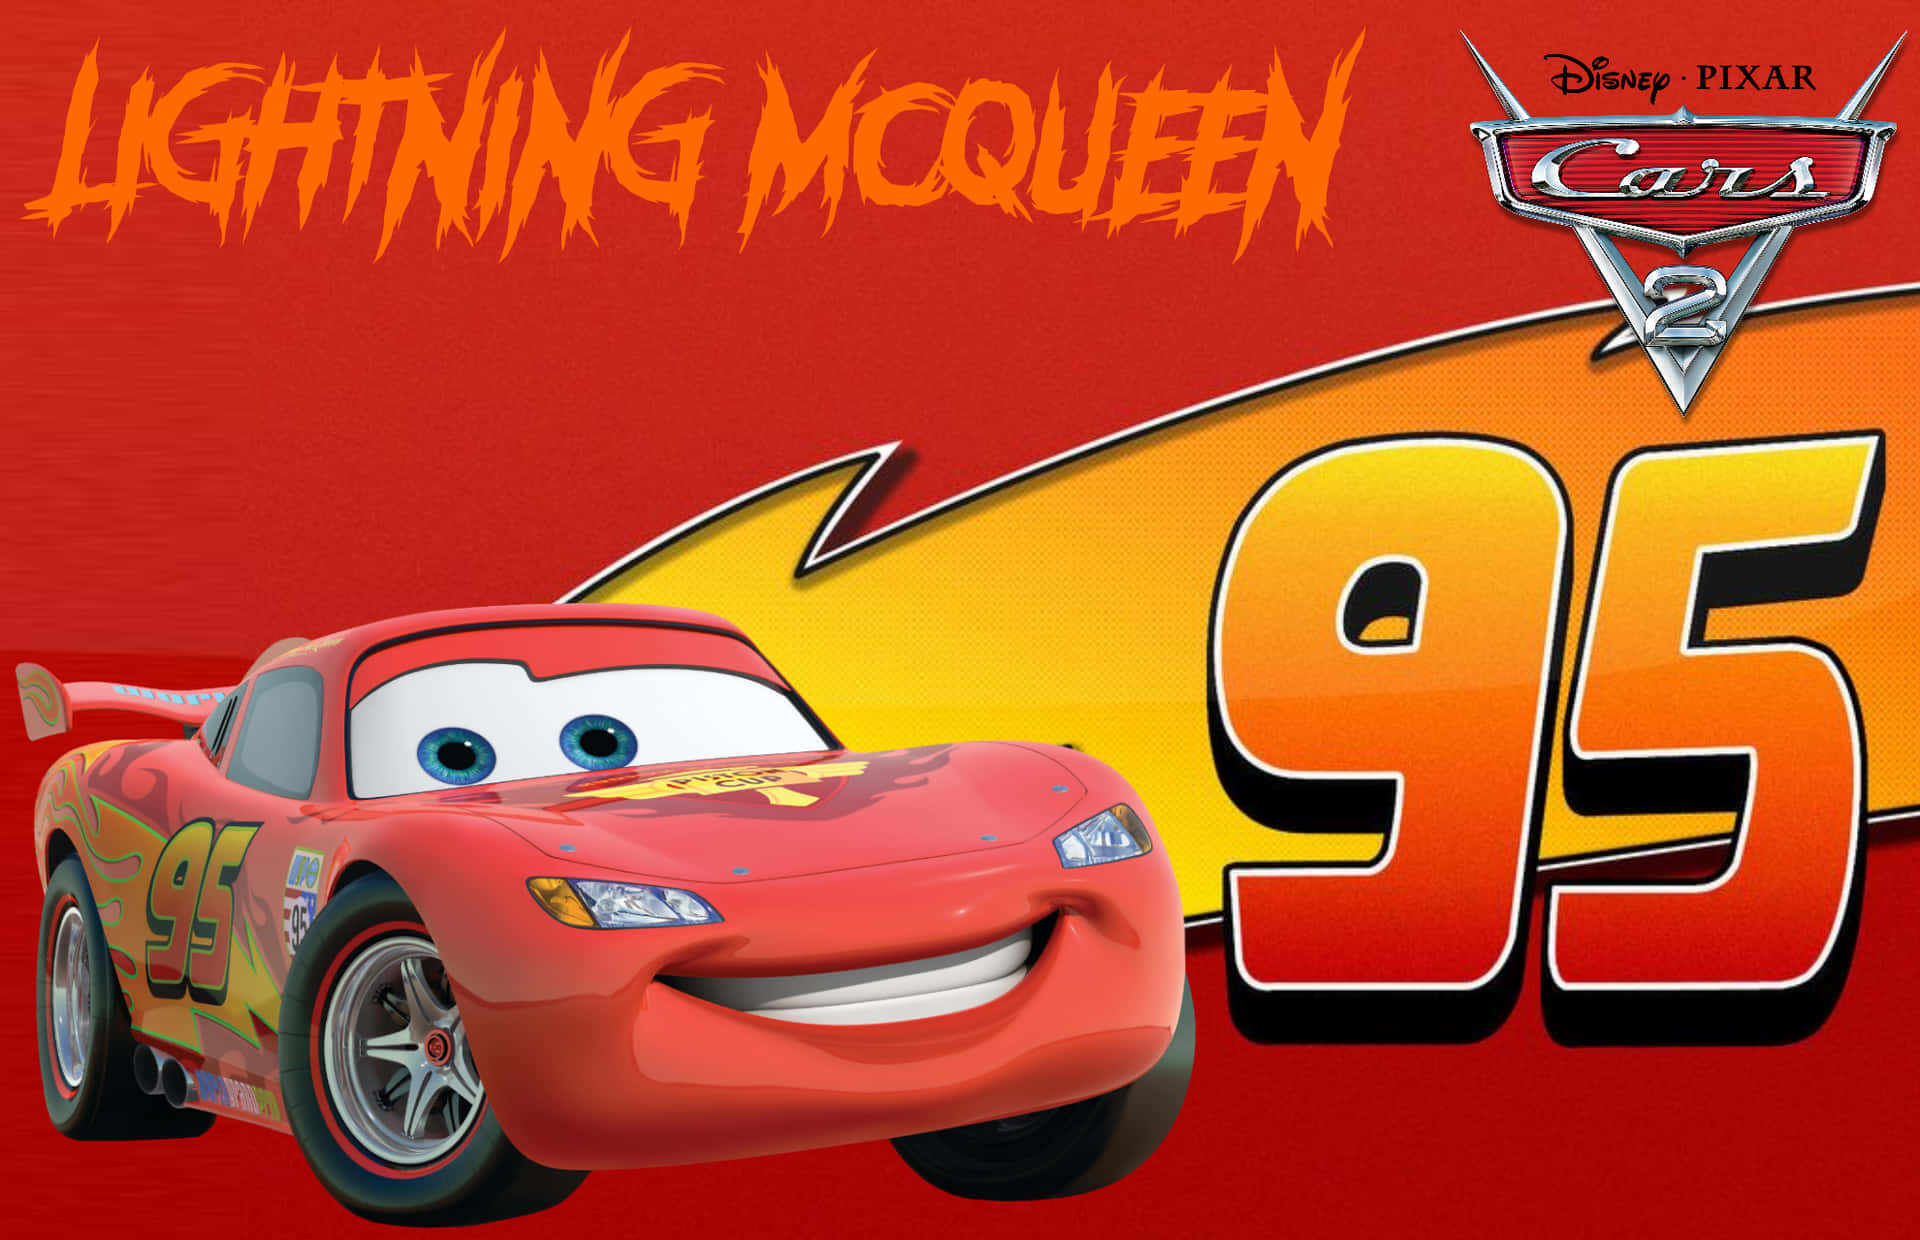 Lightning McQueen and Mater Celebrate a Successful Race in Cars 2